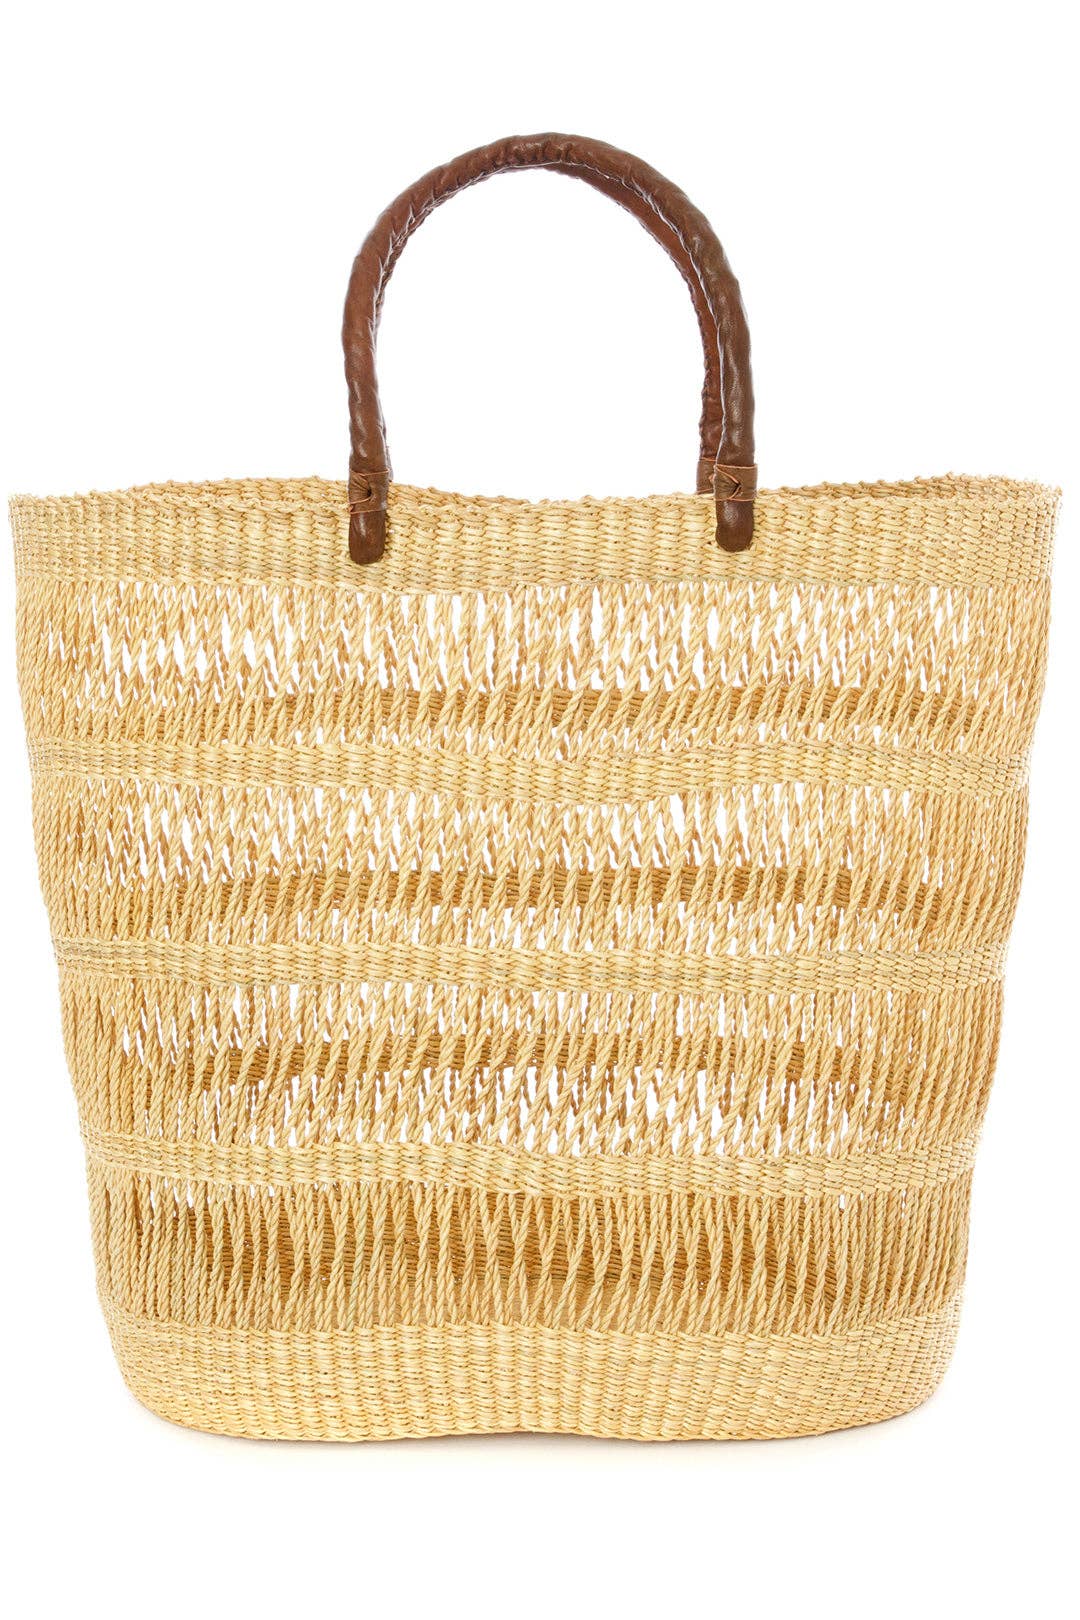 Veta Vera Lace Weave Shopper with Leather Handles